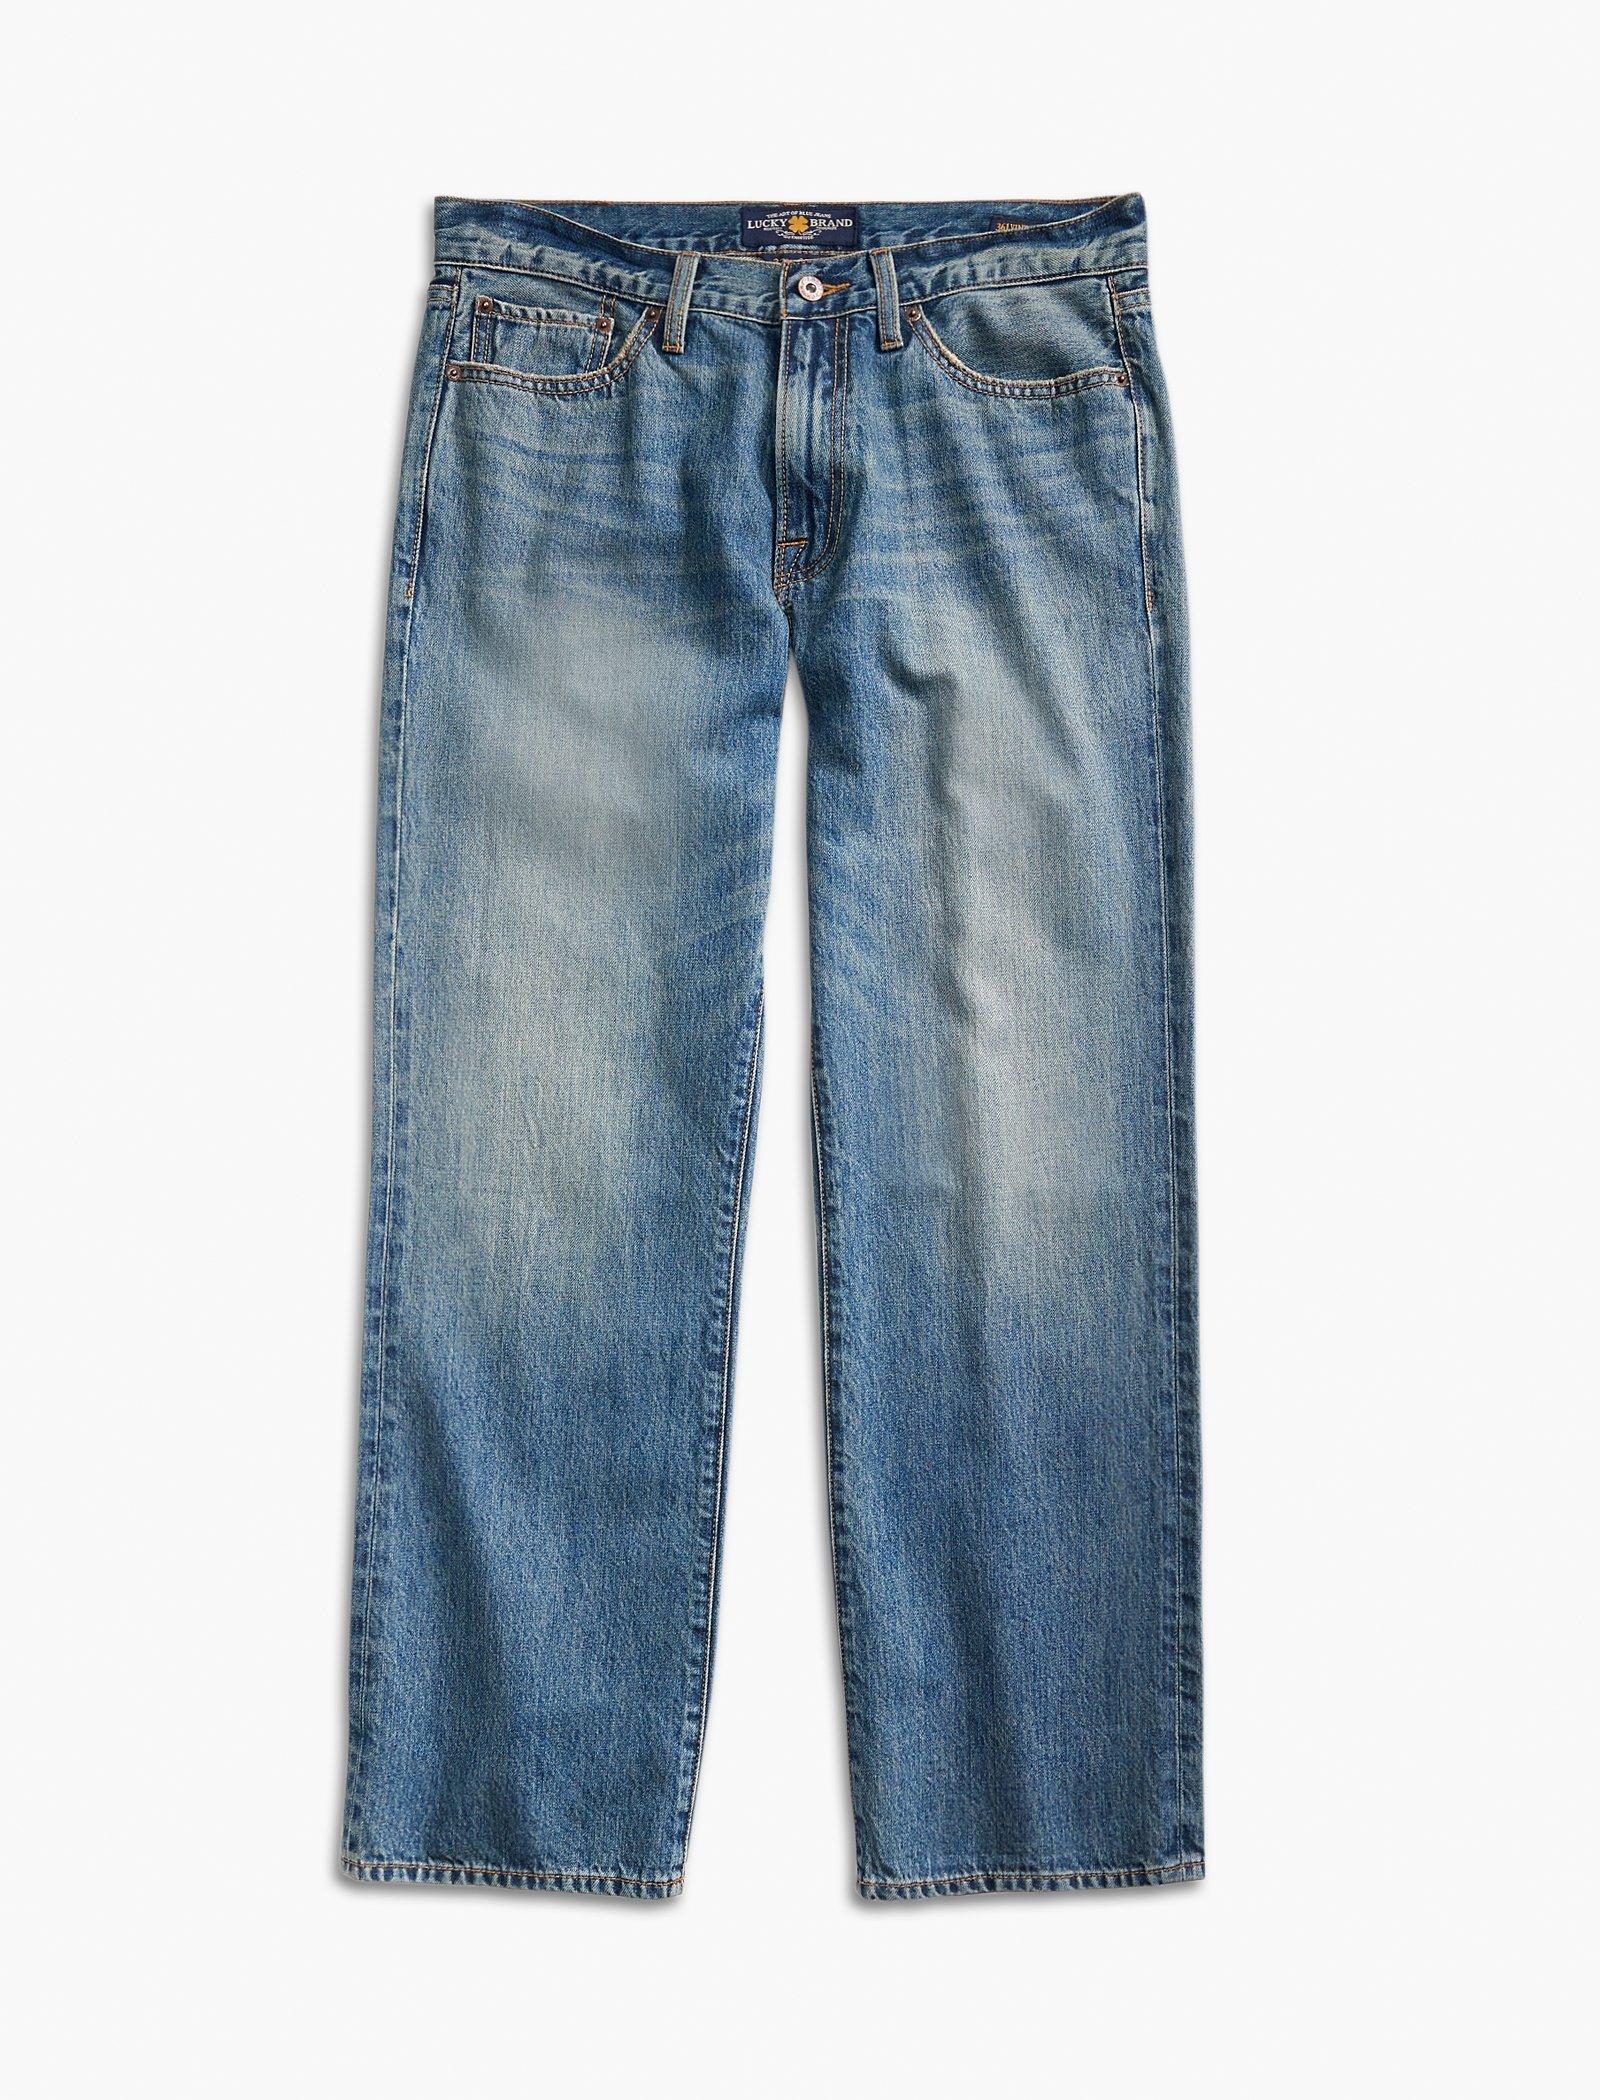 lucky 361 vintage straight jeans costco